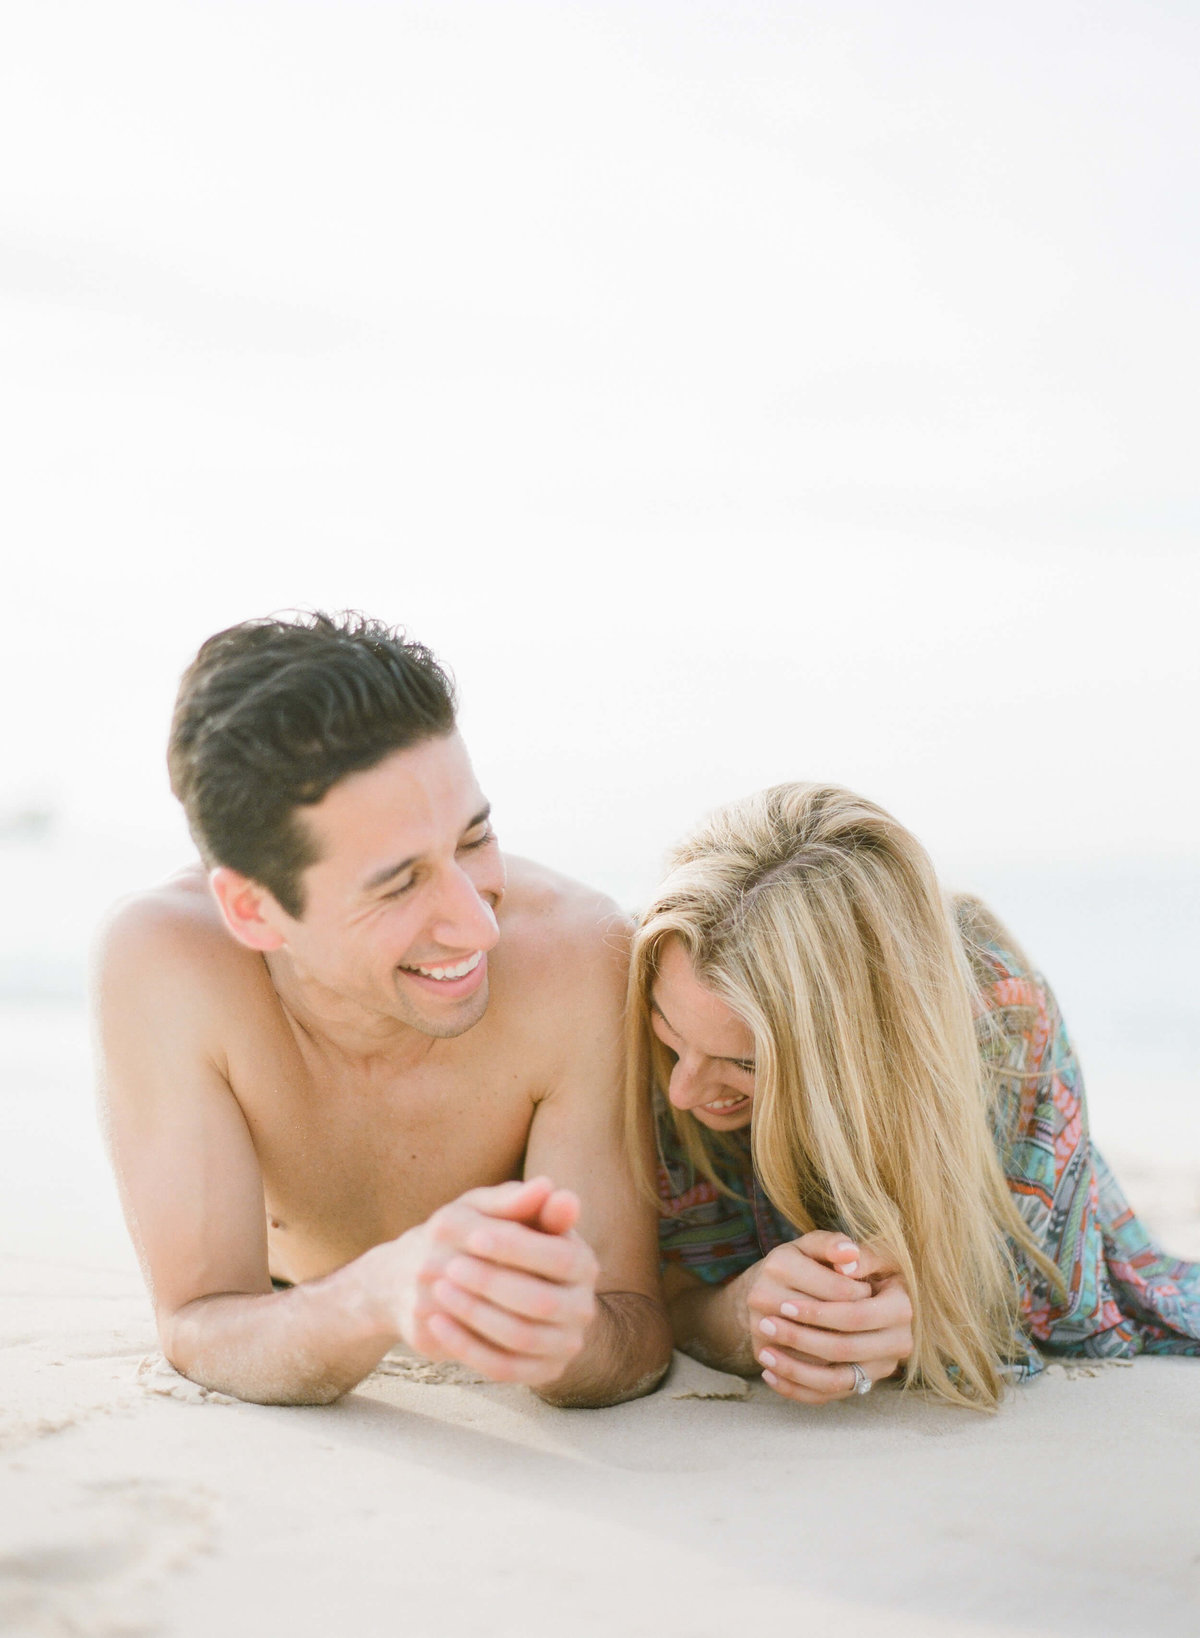 4-KTMerry-engagement-photography-beach